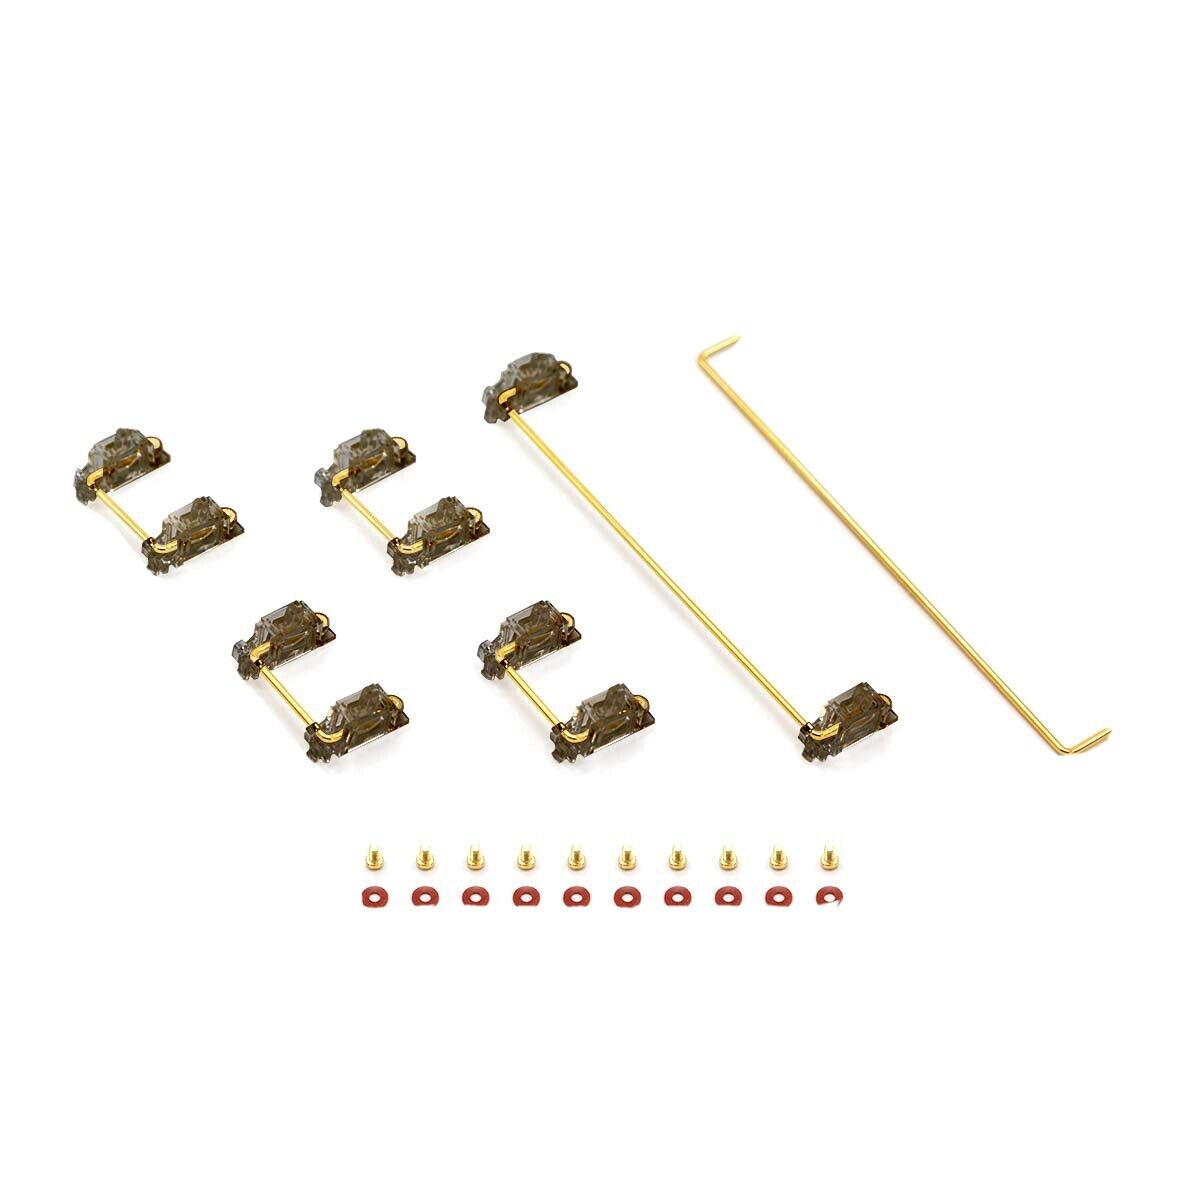 DUROCK V2 PCB Mount Screw-in Stabilizers for 60/87% keyboards